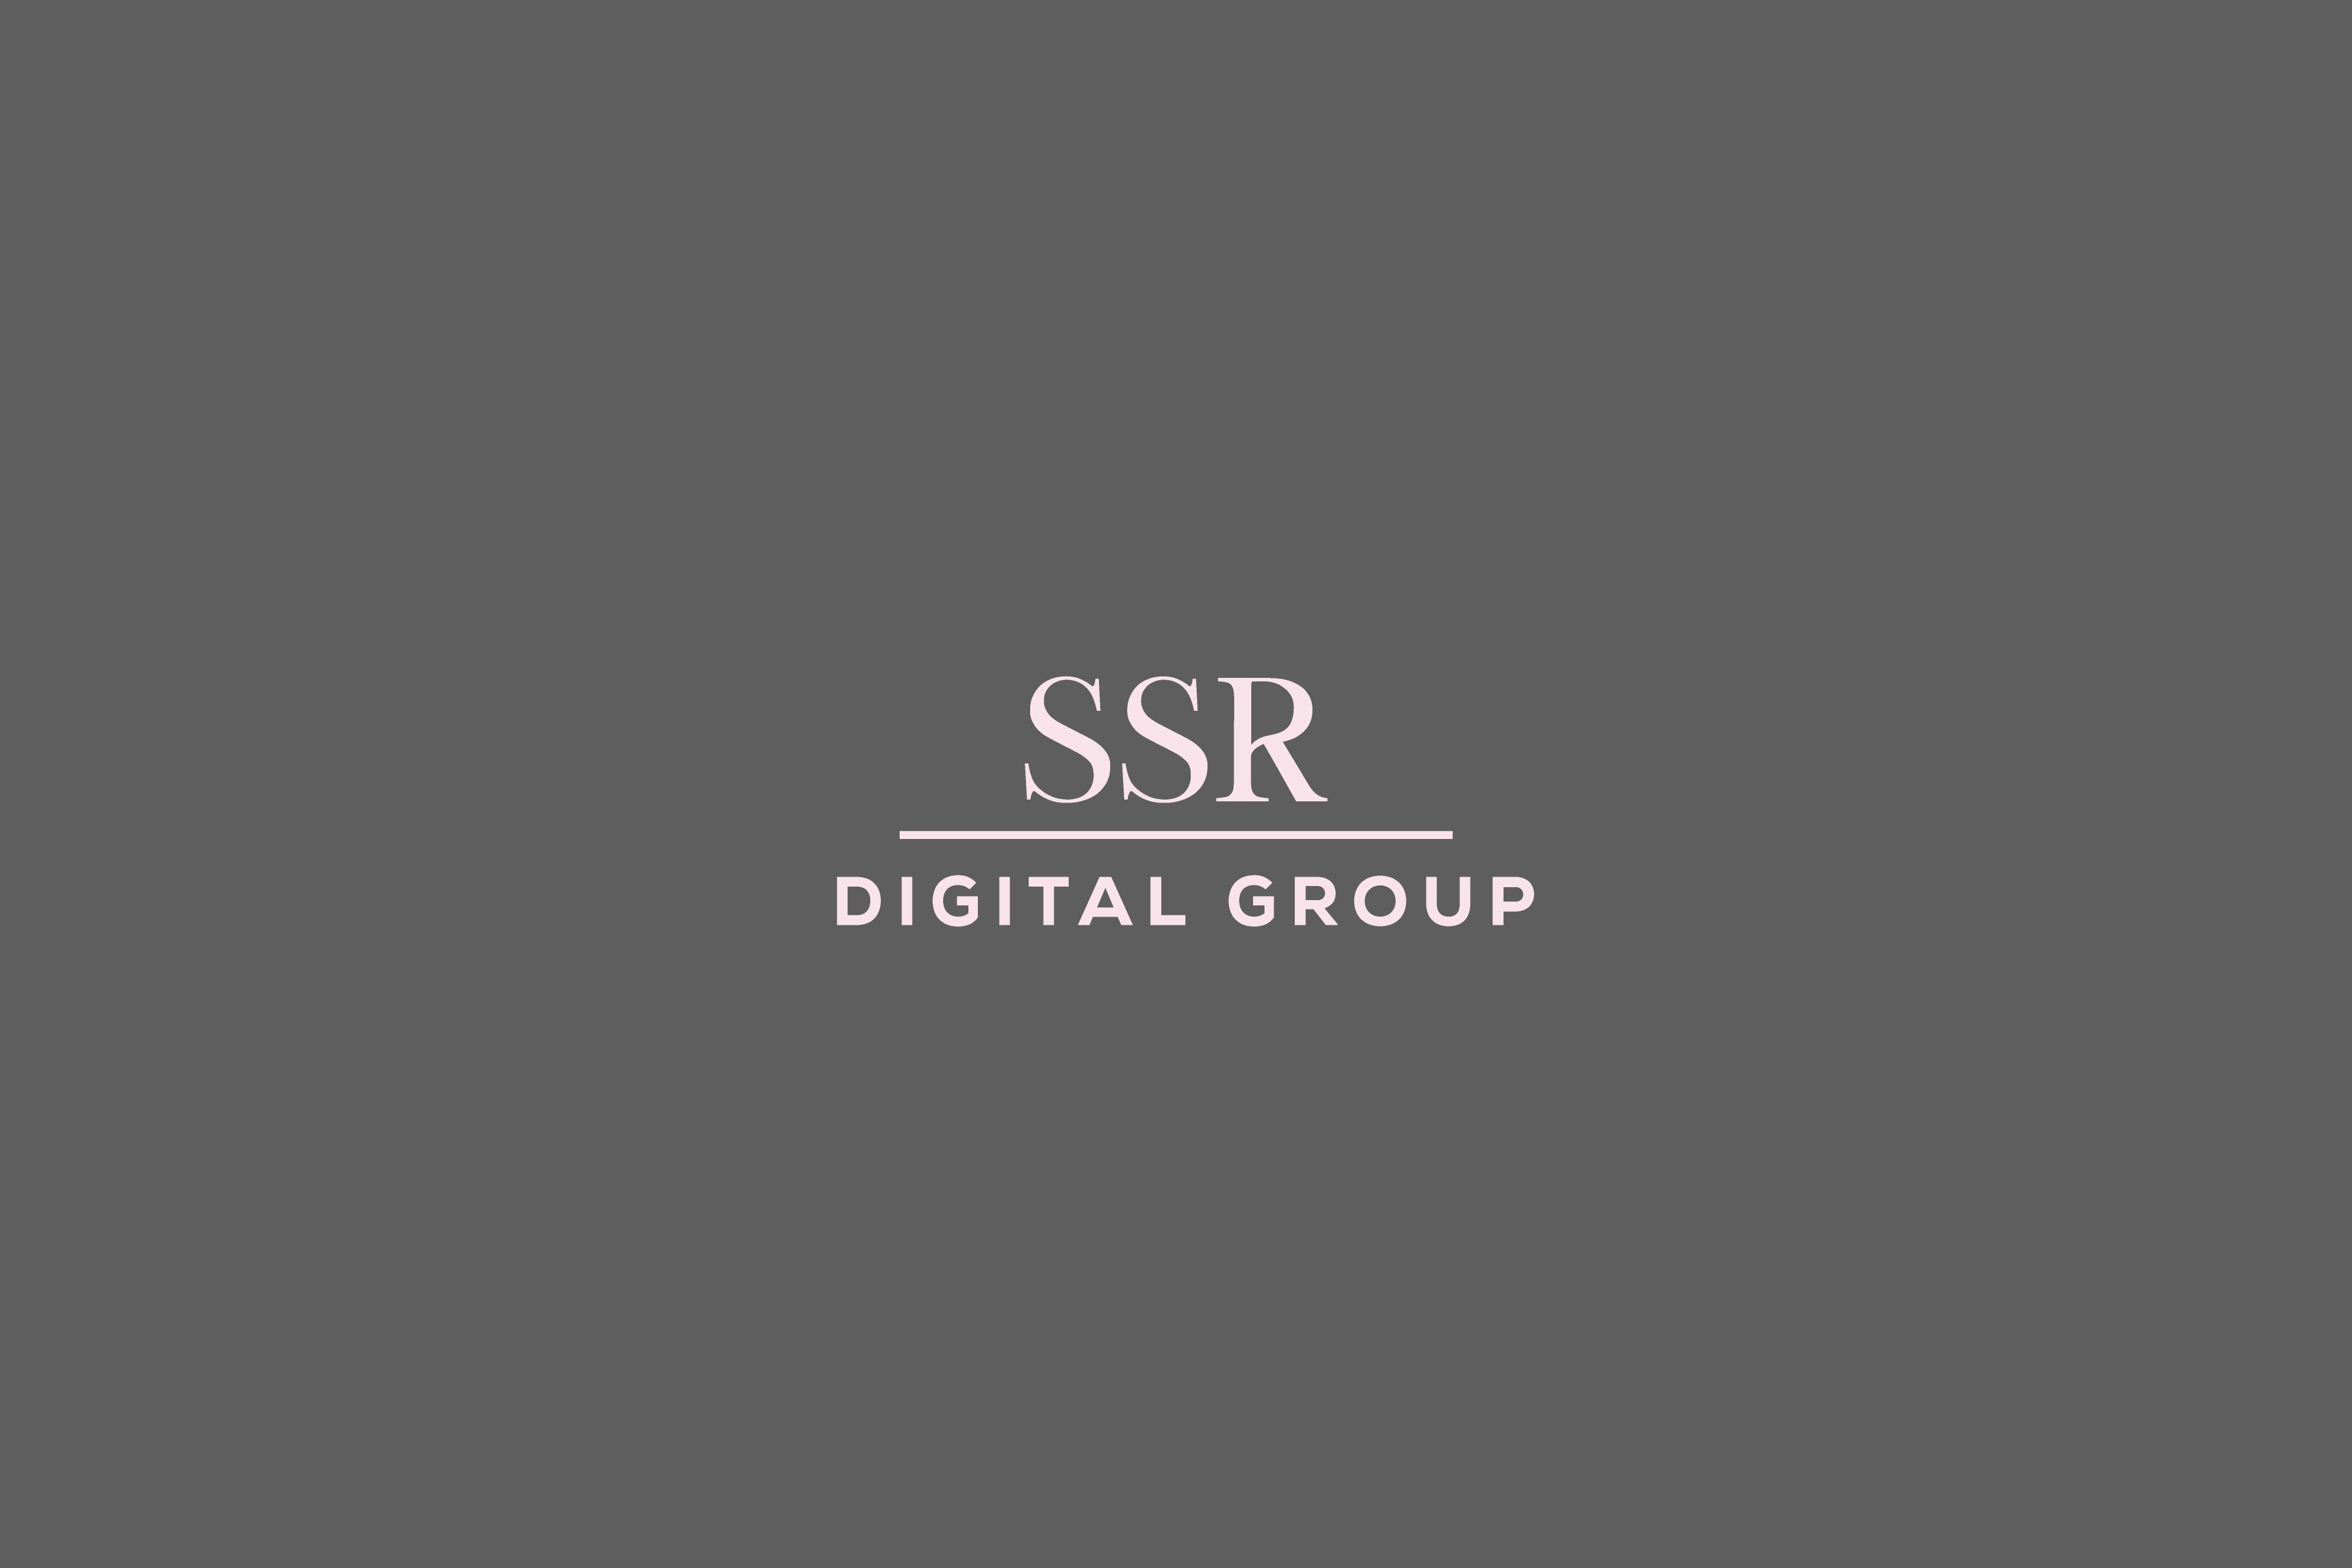 SSR Digital Group profile on Qualified.One